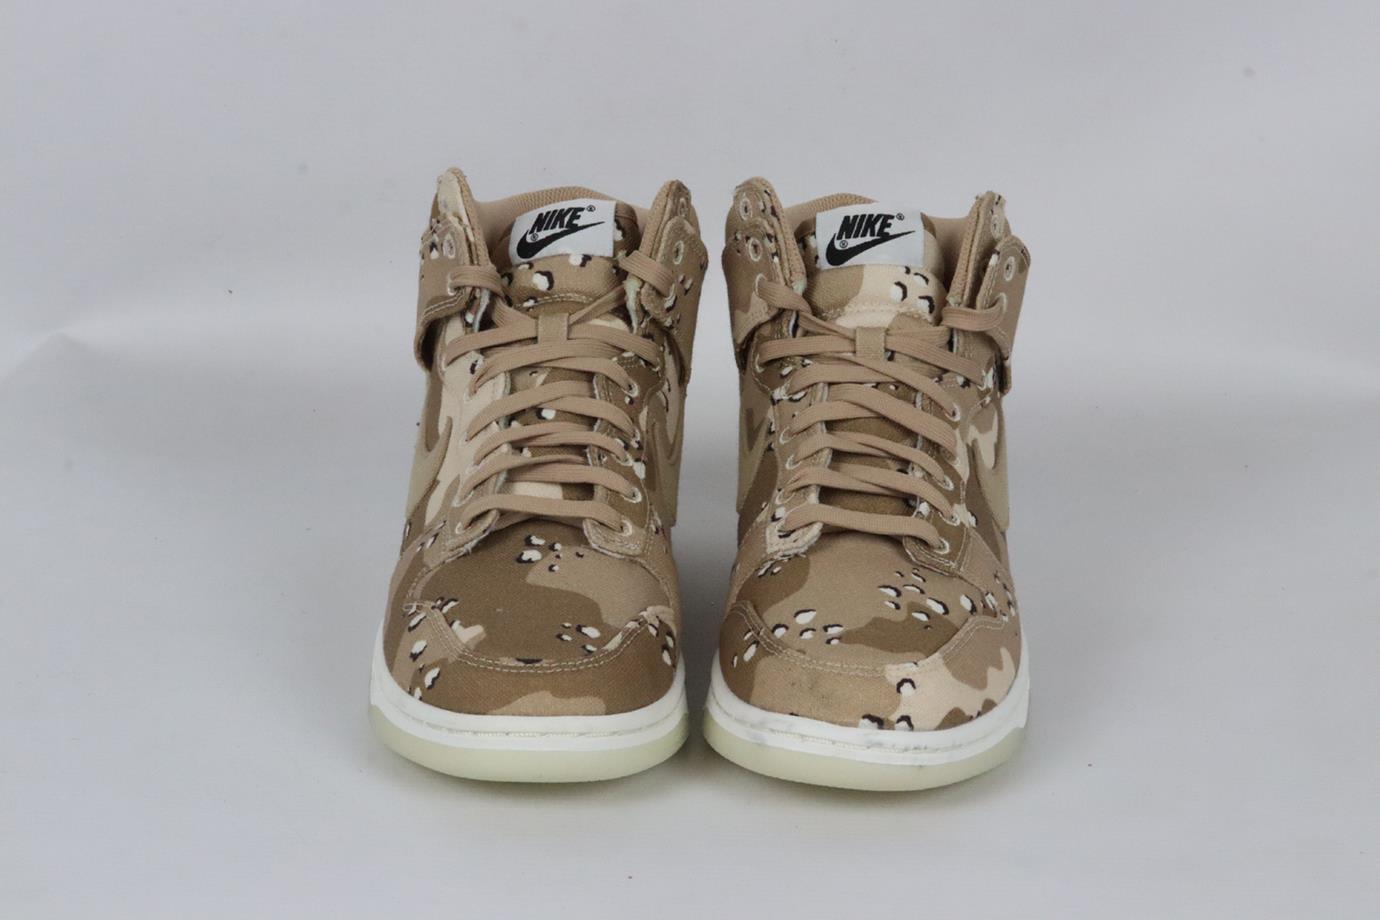 NIKE DUNK CAMOUFLAGE PRINT CANVAS HIGH TOP SNEAKERS EU 39 UK 5.5 US 8